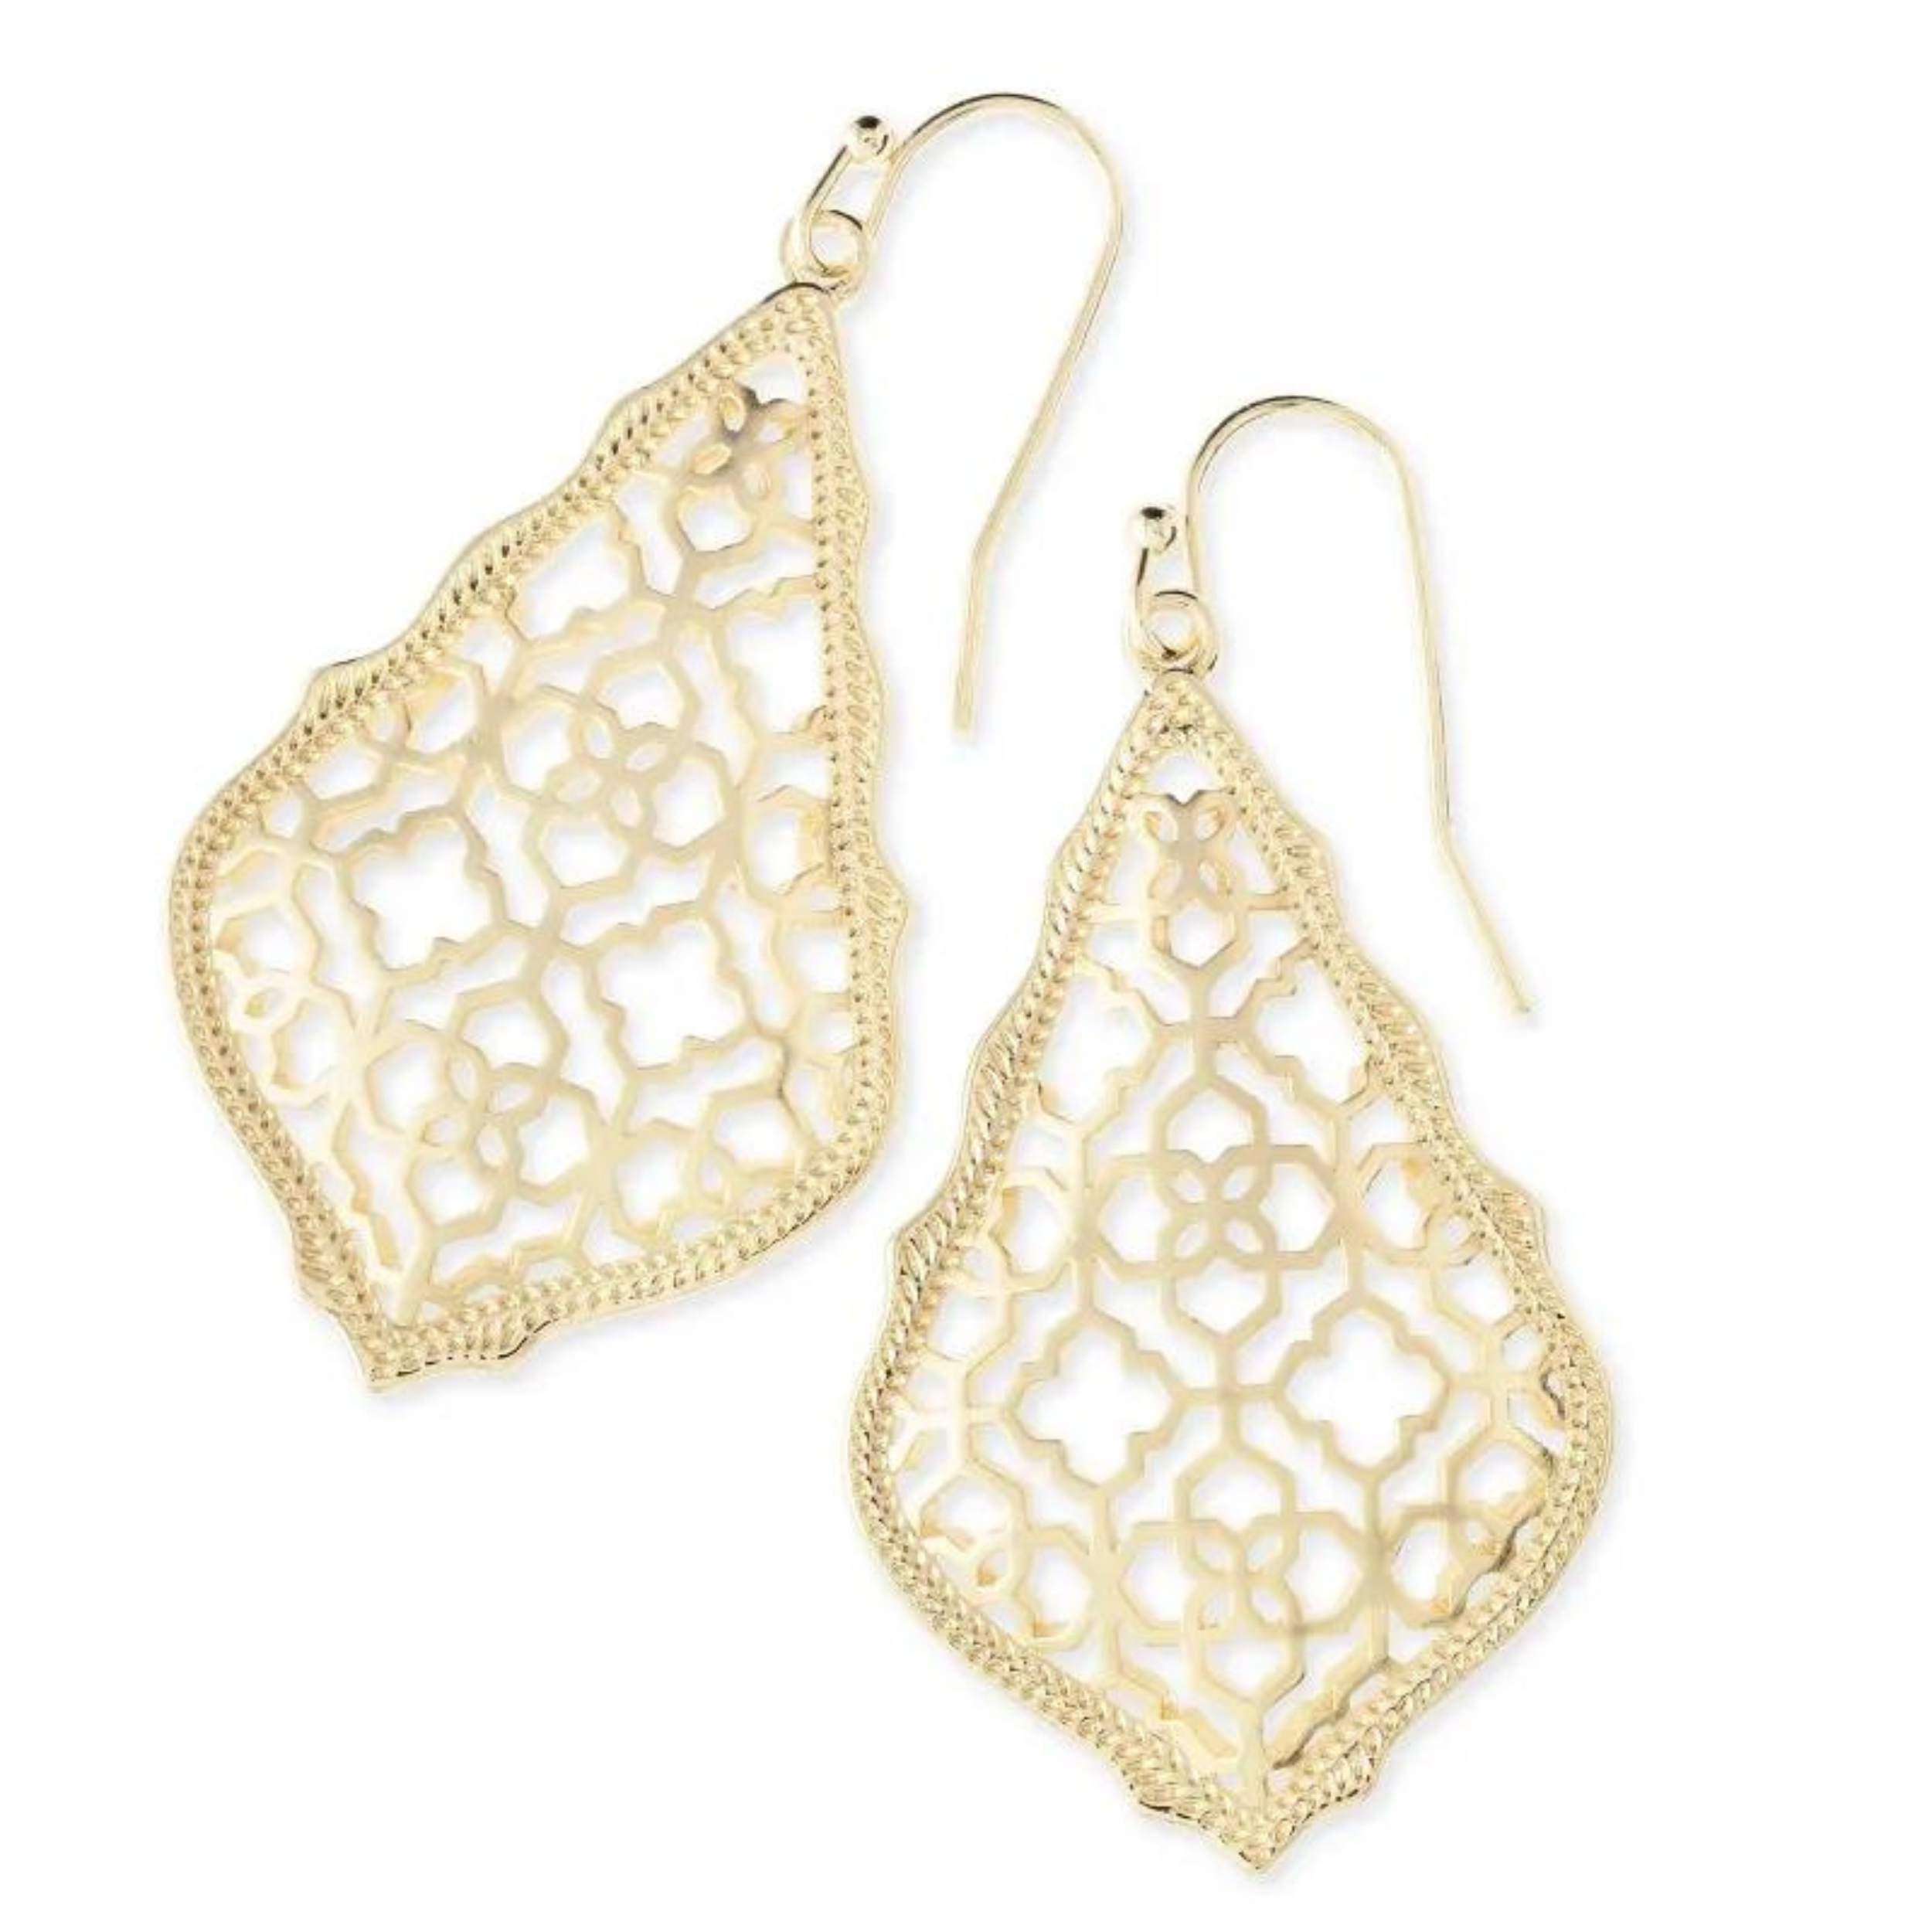 Gold dangle earrings pictured on a white background.